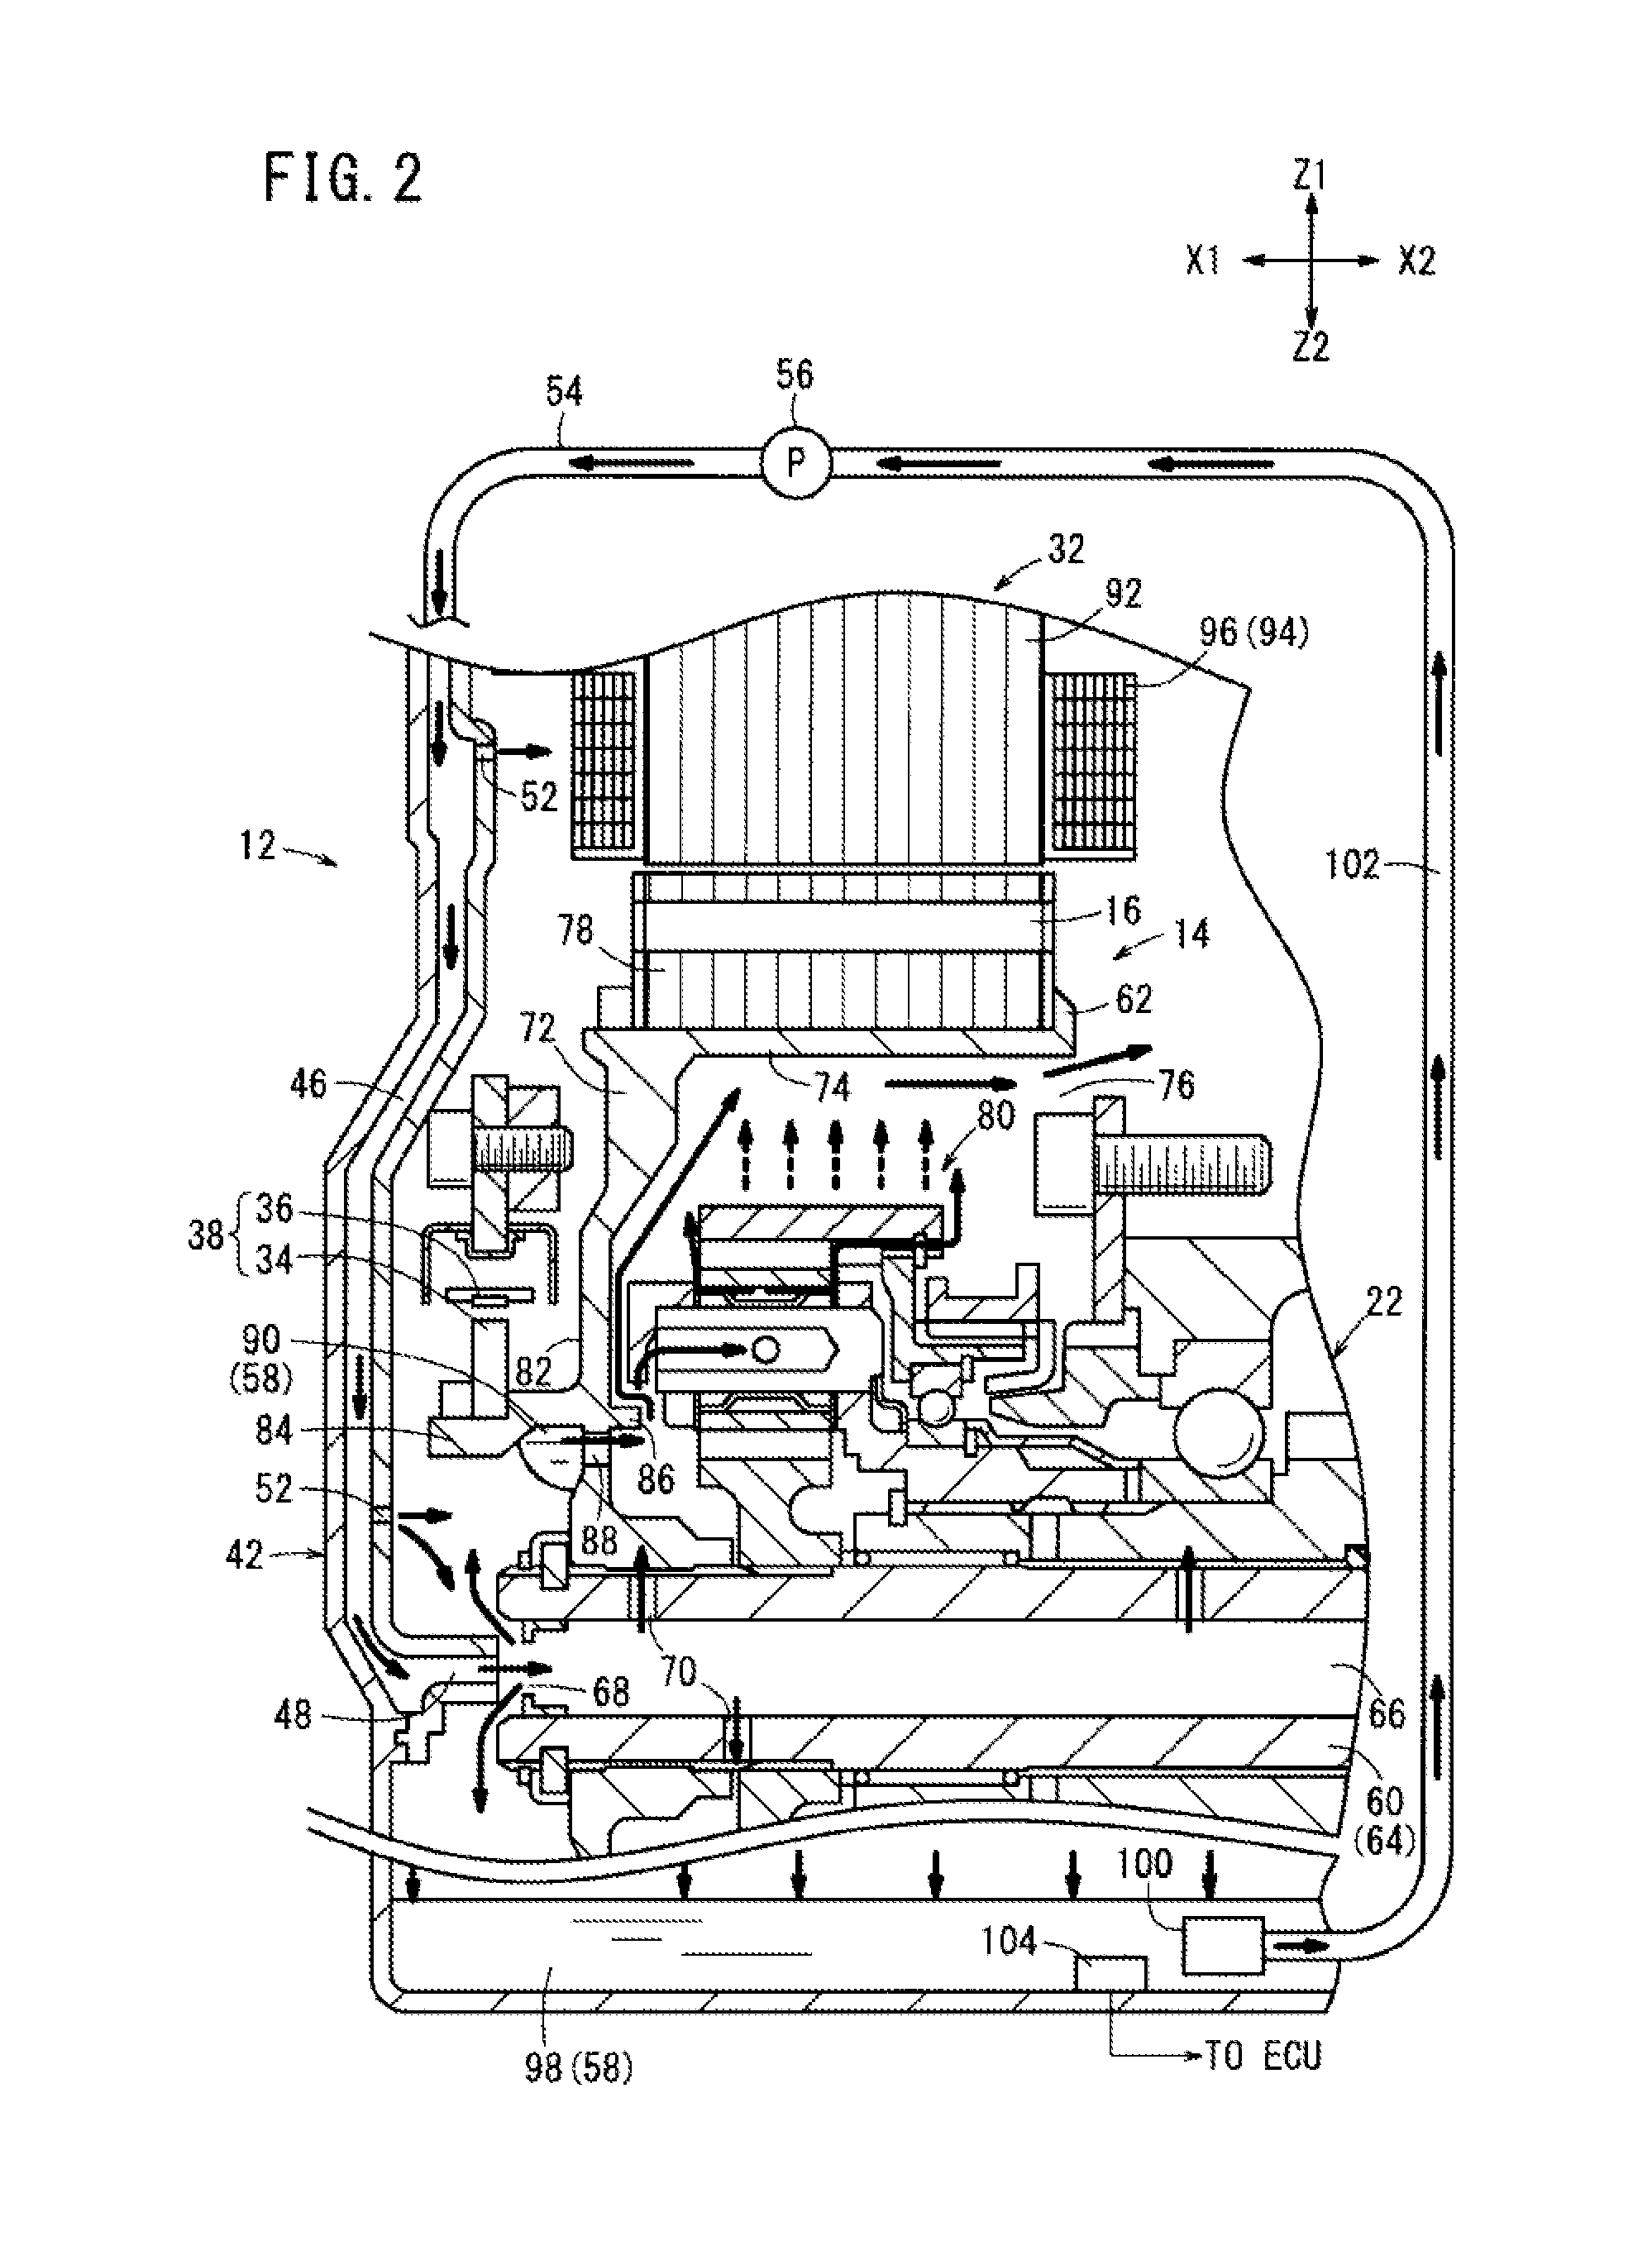 Method of estimating magnet temperature for rotary electric machinery